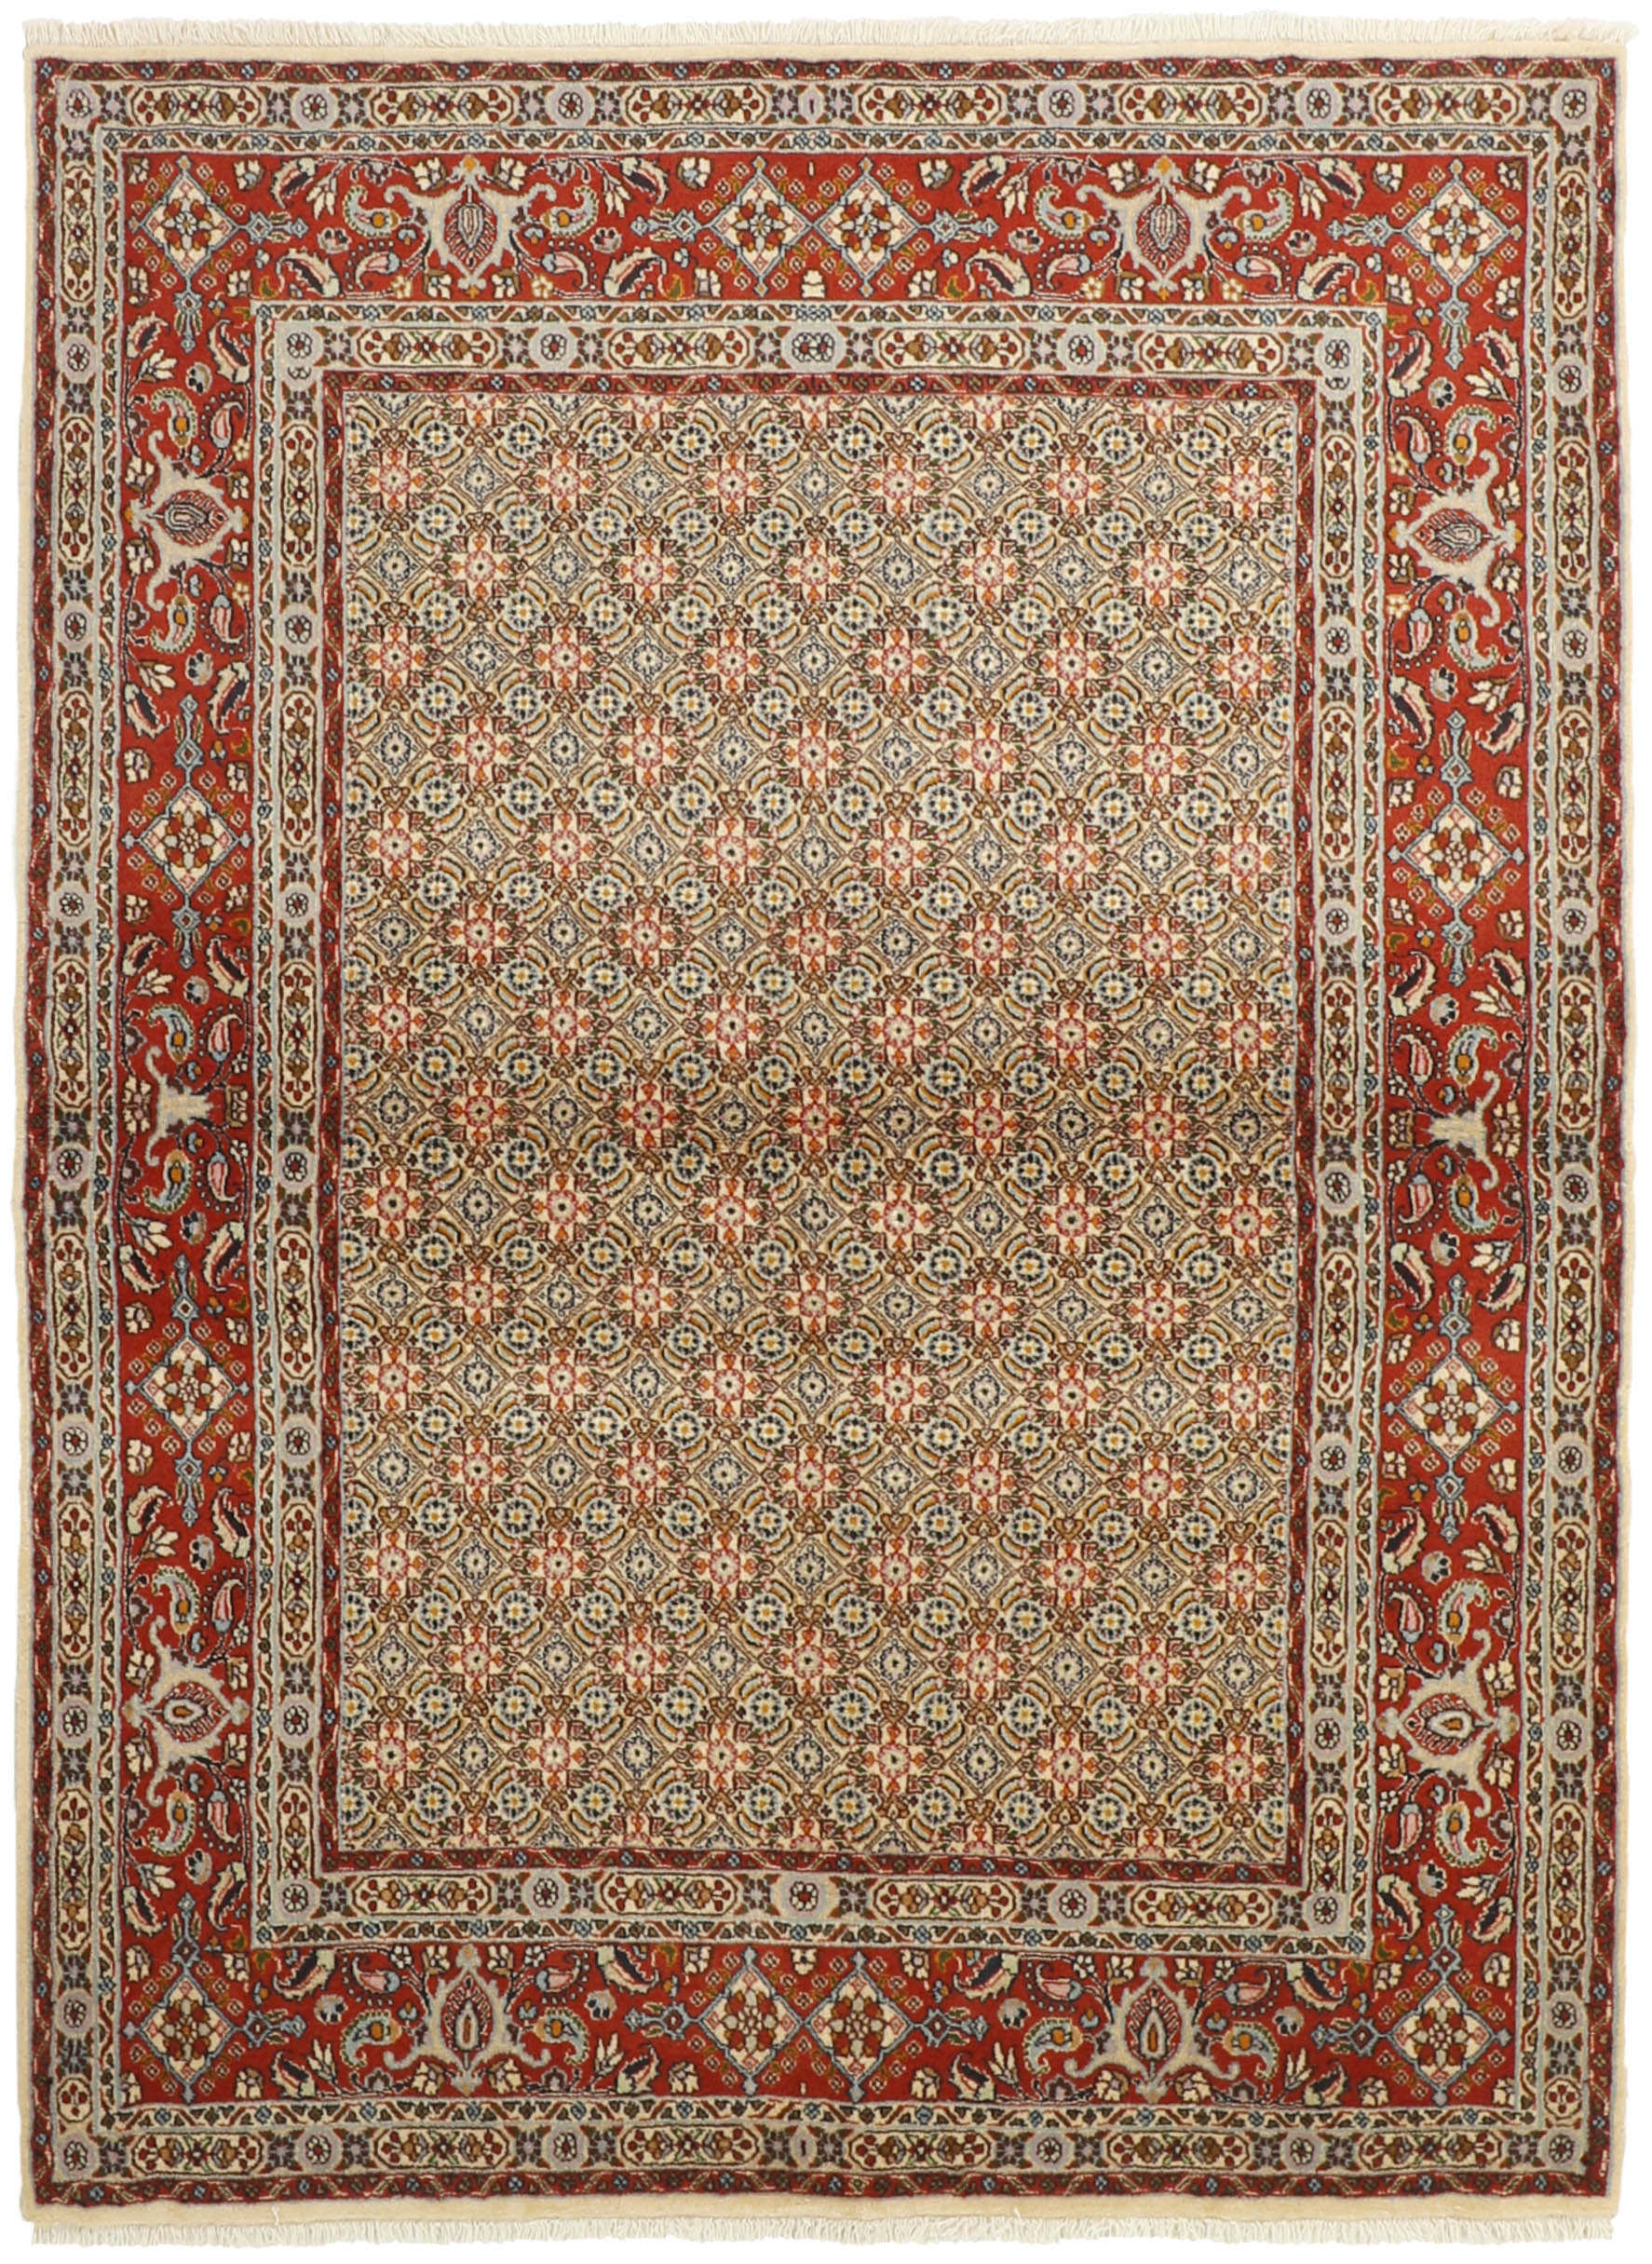 multicolour persian rug with floral pattern